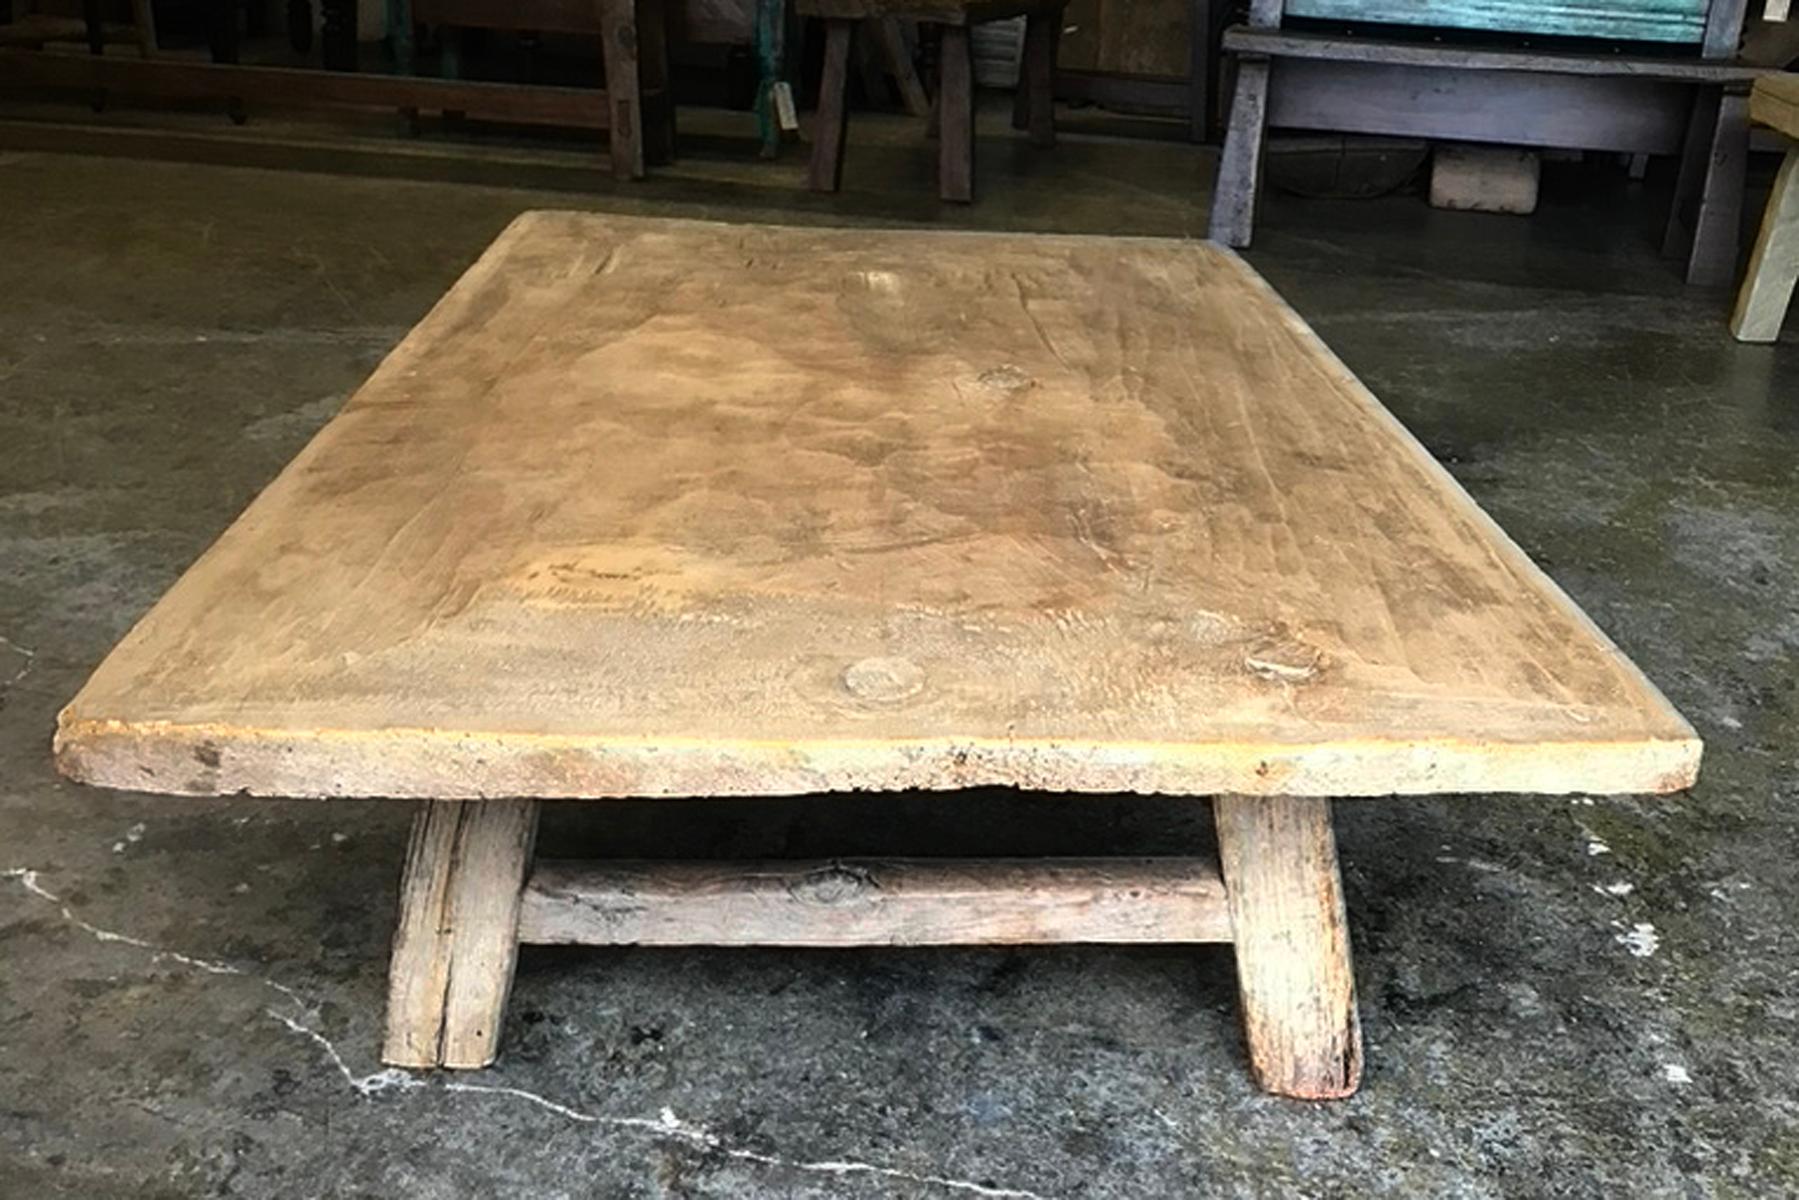 Rustic One Wide Antique Board Coffee Table For Sale